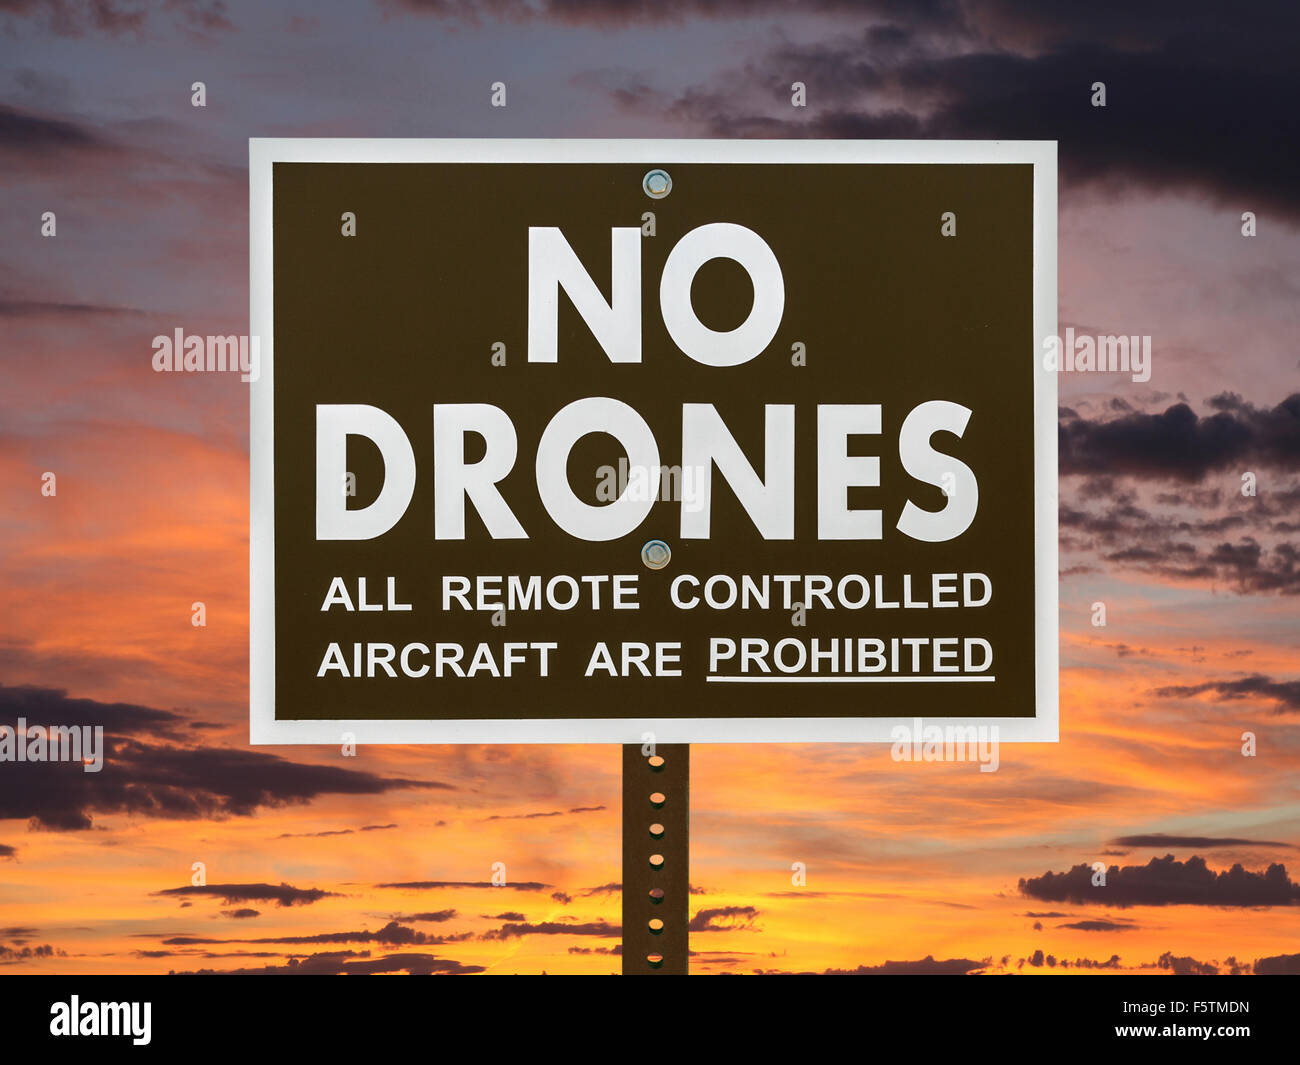 No drones sign with sunset sky. Stock Photo